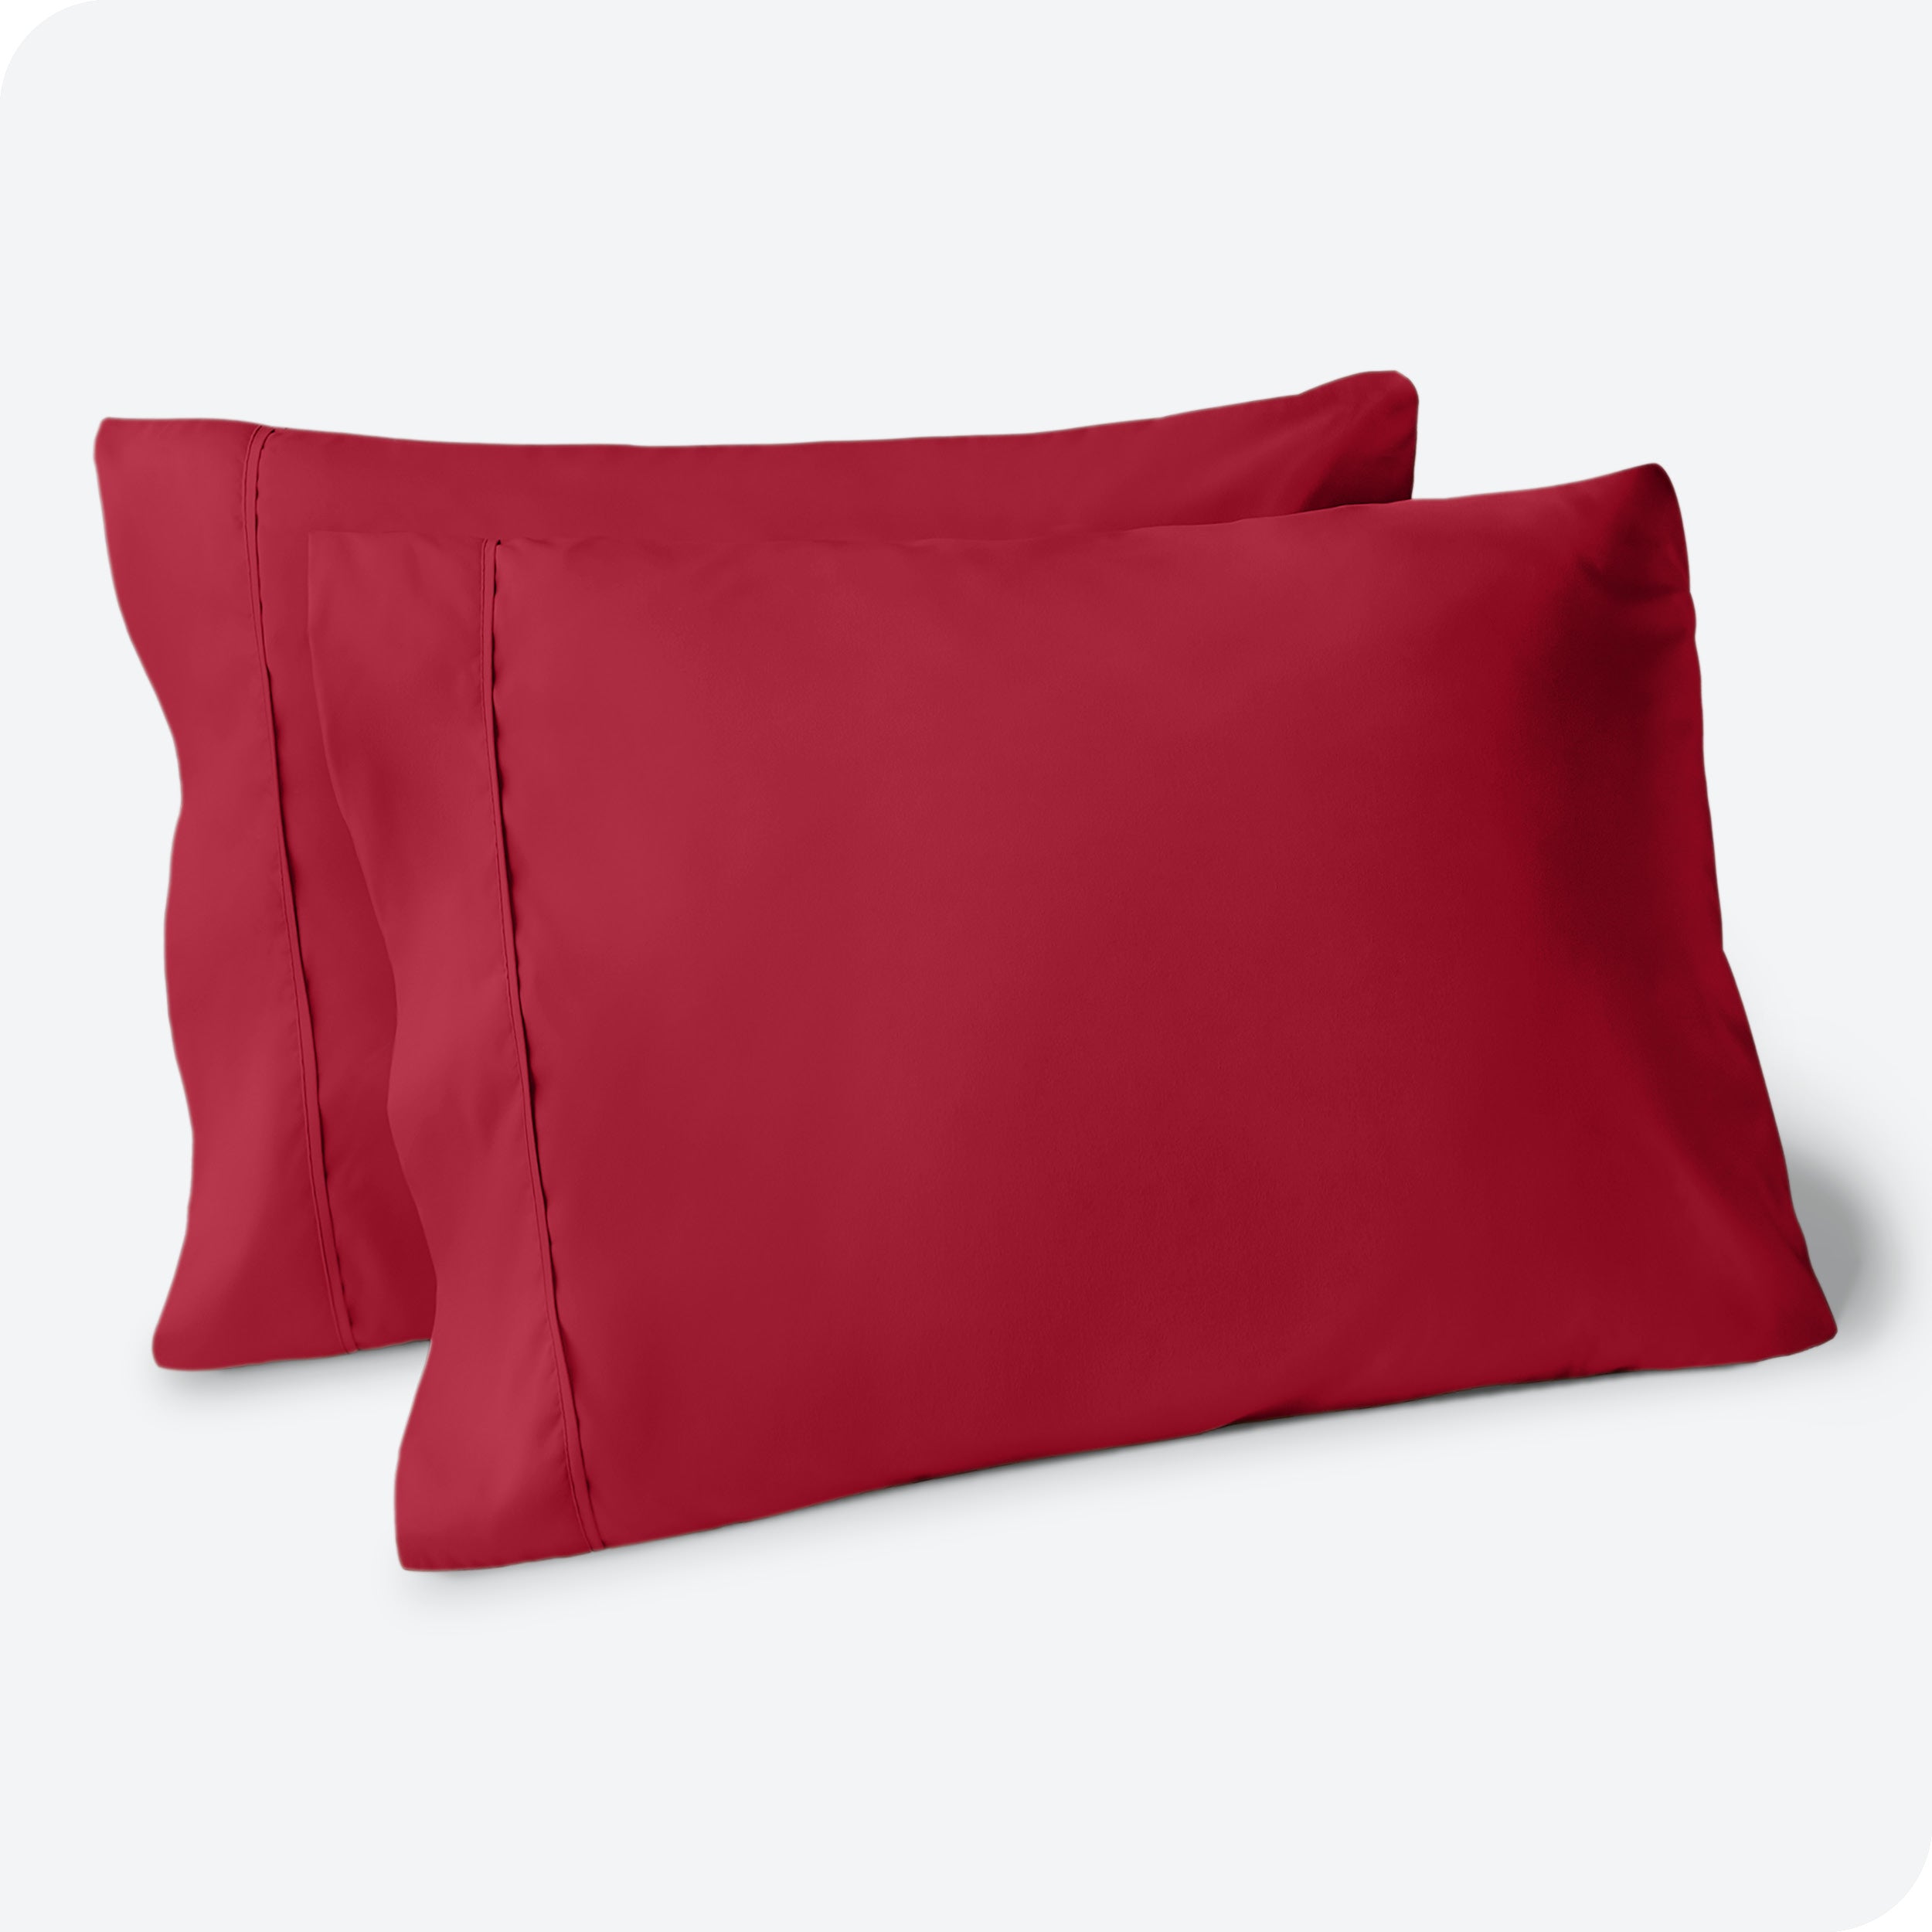 Two pillows on a white background with red pillowcases on them